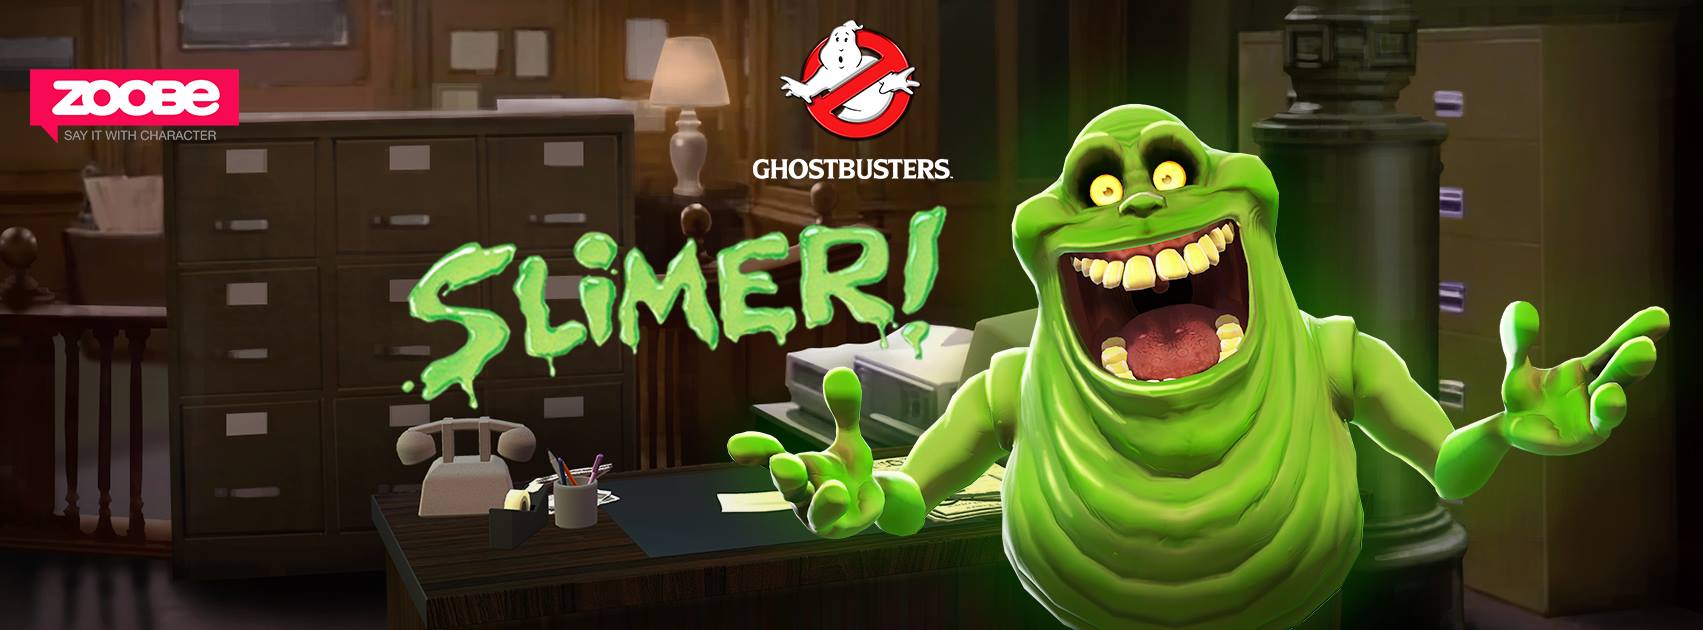 Zoobe – character voice messages – Hello From Slimer! | GHOSTBUSTERS MANIA